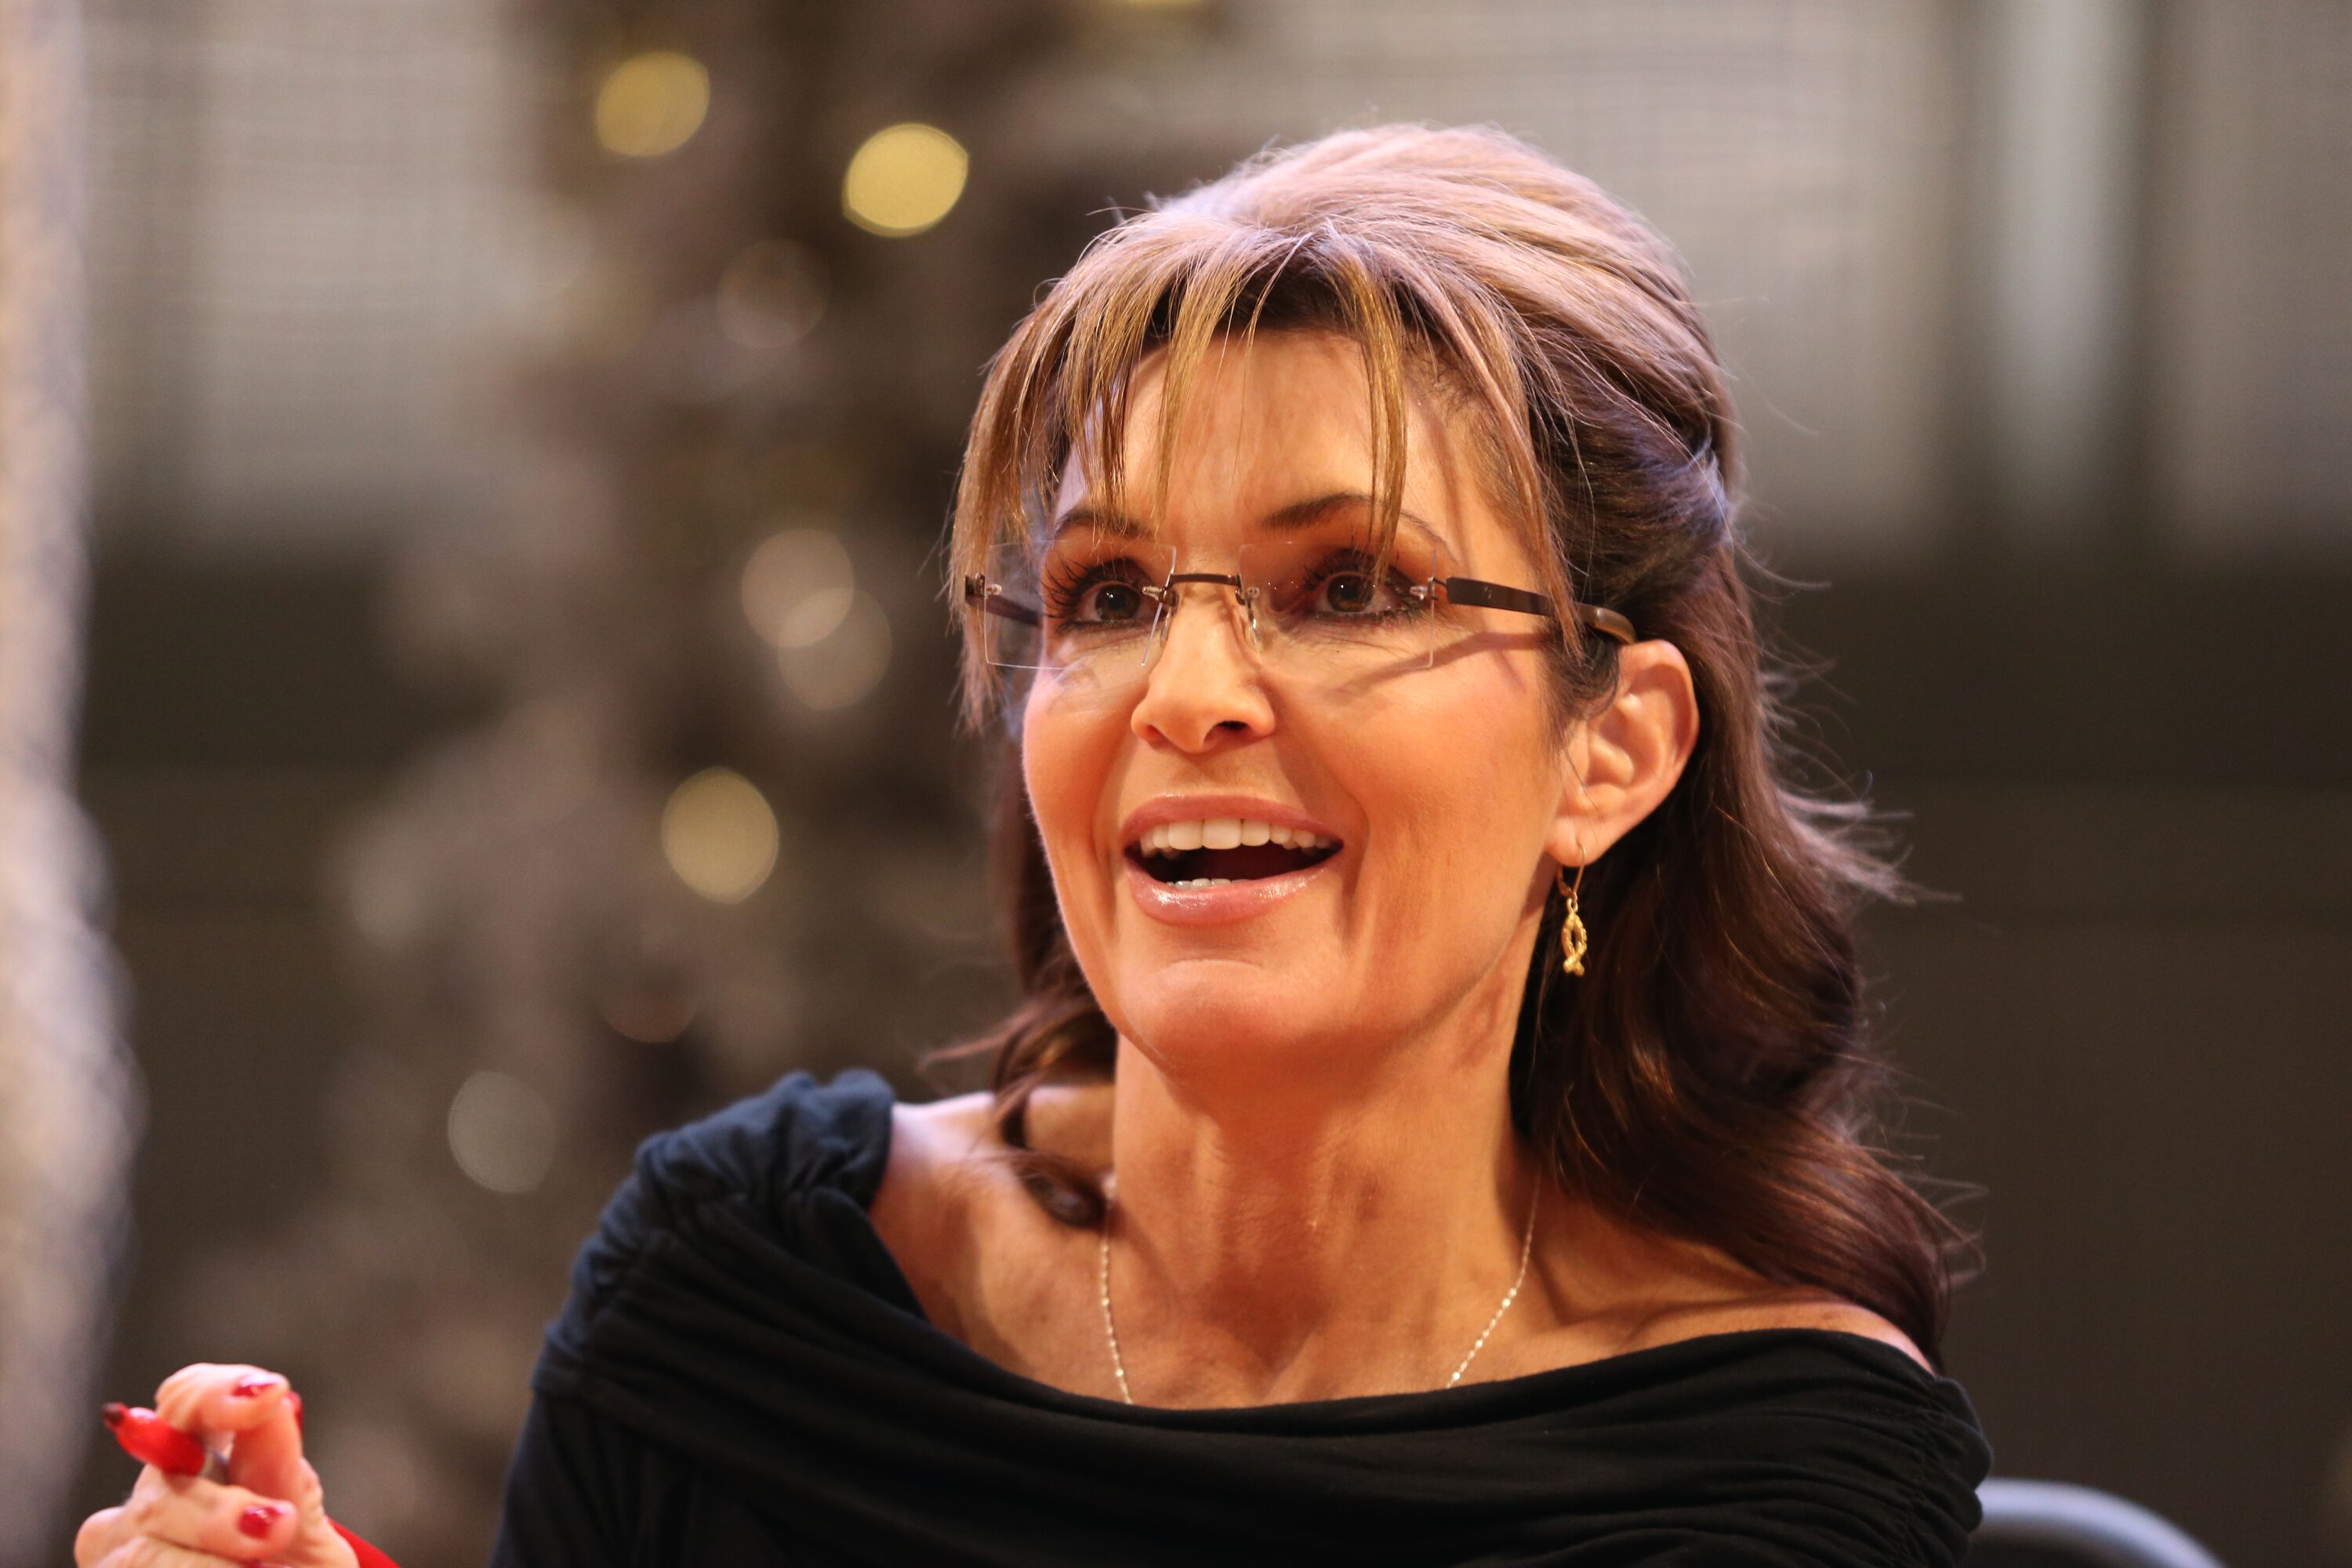 Sarah Palin signs copies of her book on November 21, 2013 at Mall of America, Minnesota. | Source: Getty Images